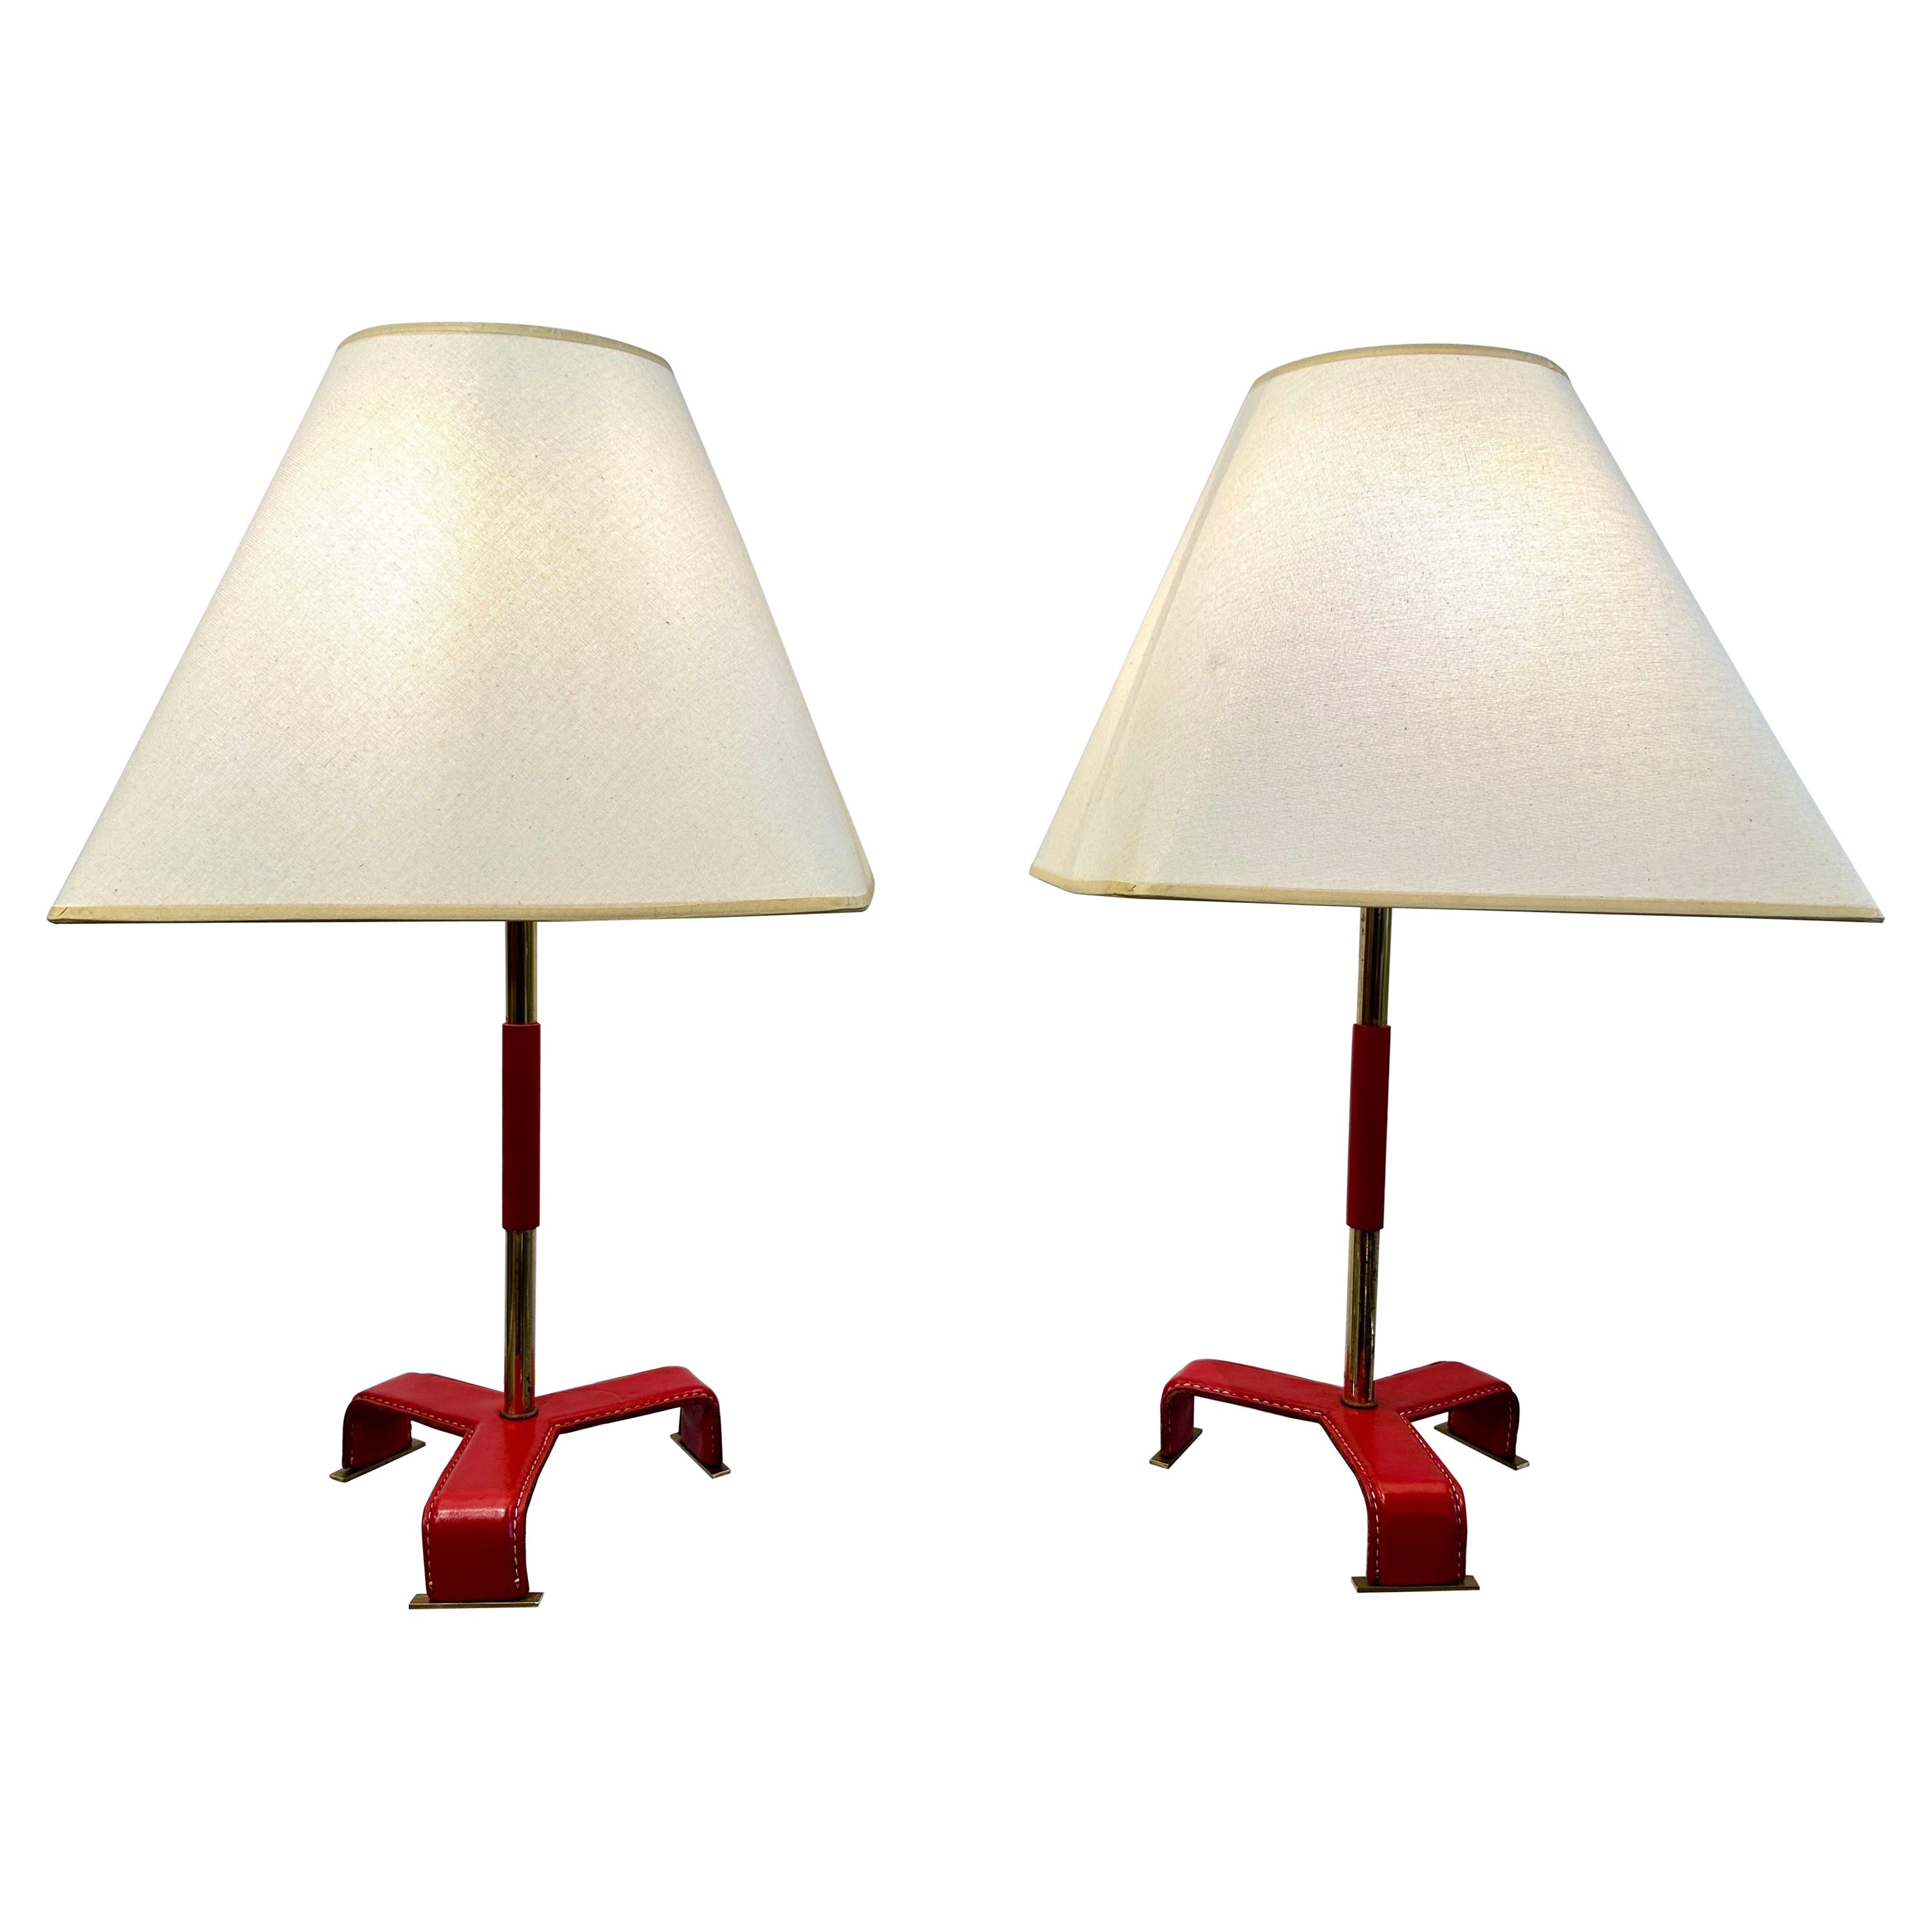 Vintage Pair of Jacques Adnet style Red Stitched Leather Table Lamps, 1950's